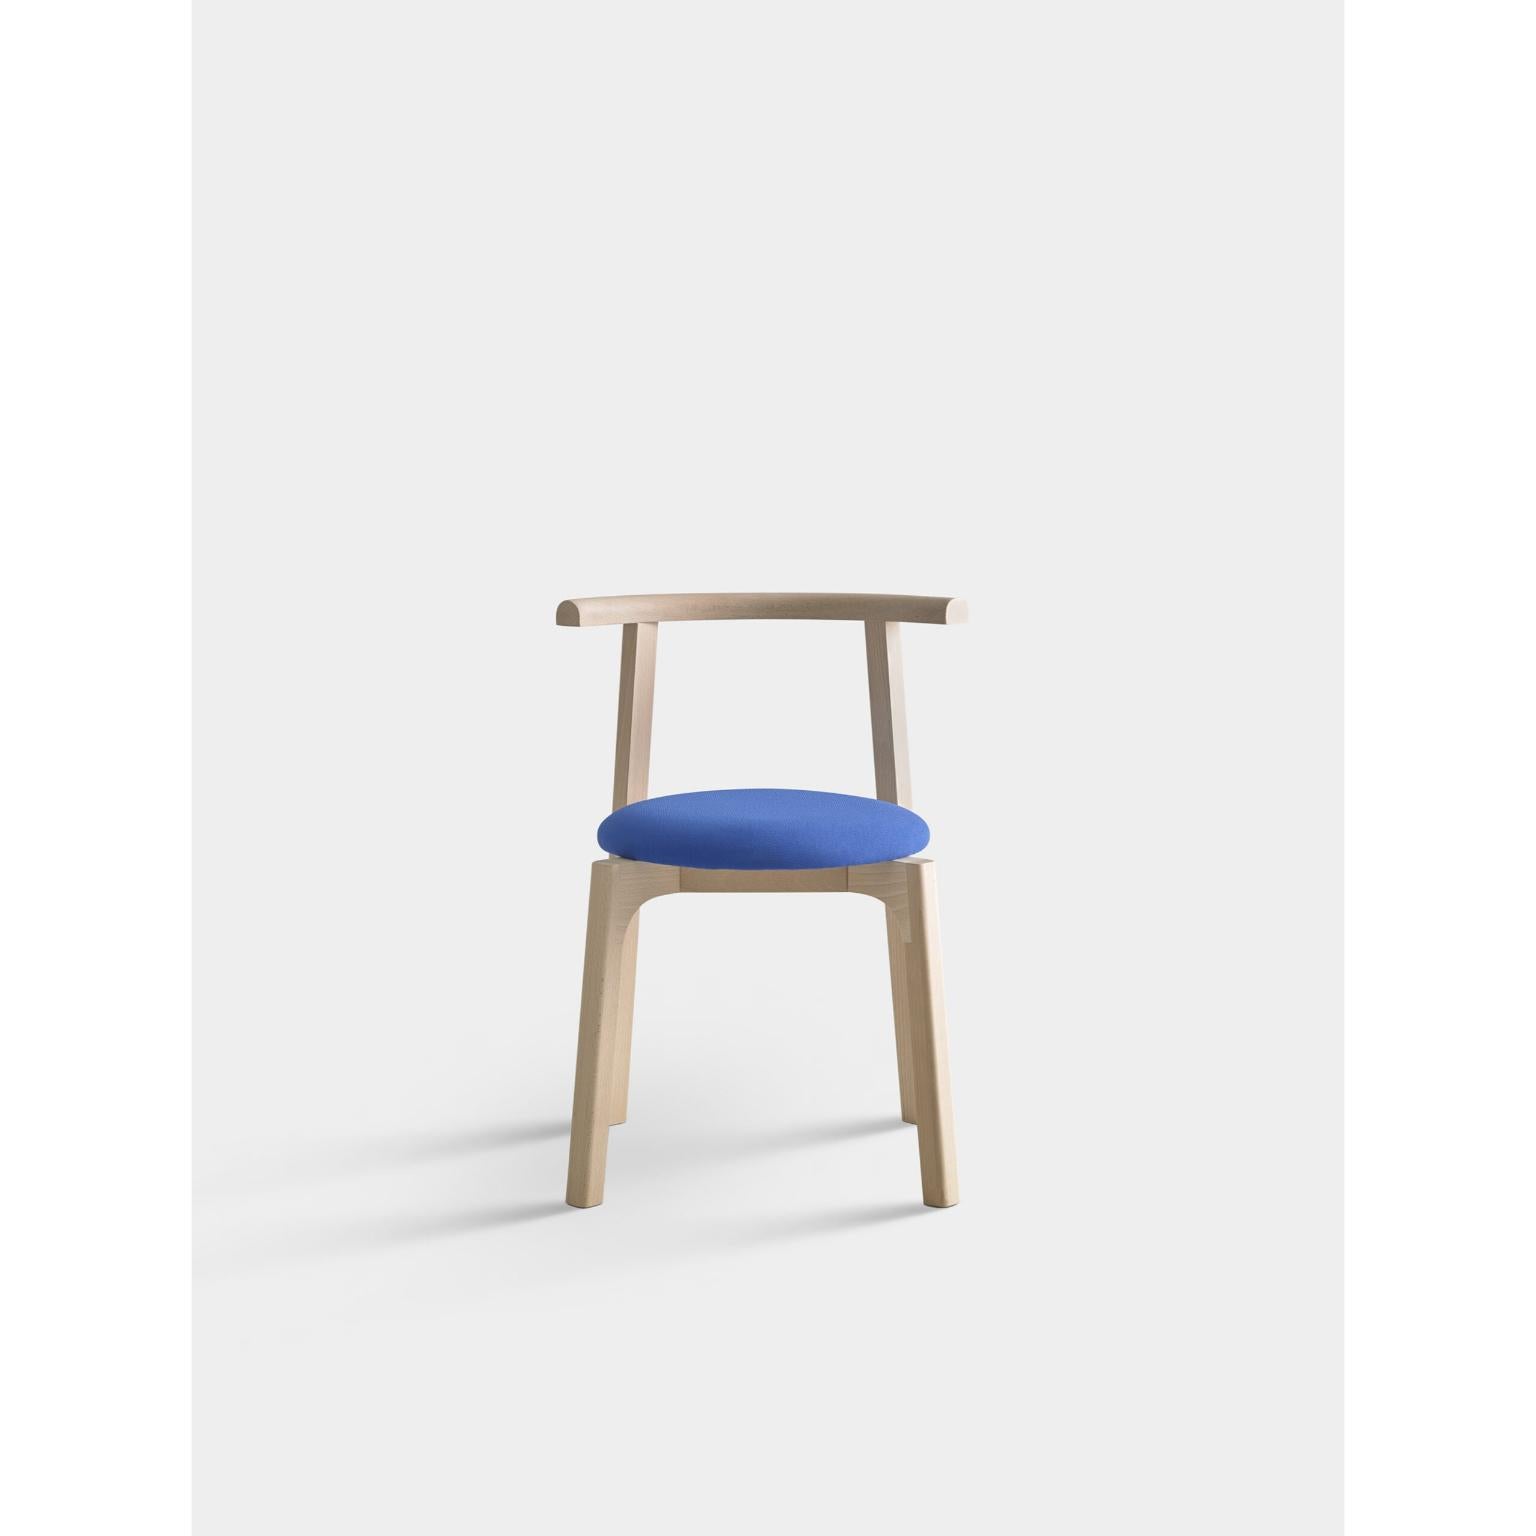 Carlo beech wood chair by Pepe Albargues
Dimensions: W 55 x D 51 x H 73 cm 
Materials: Beech wood structure, foam CMHR

Variations of materials are avaliable
Carlo is a chair in which the straight and curved lines show a perfect harmony to get